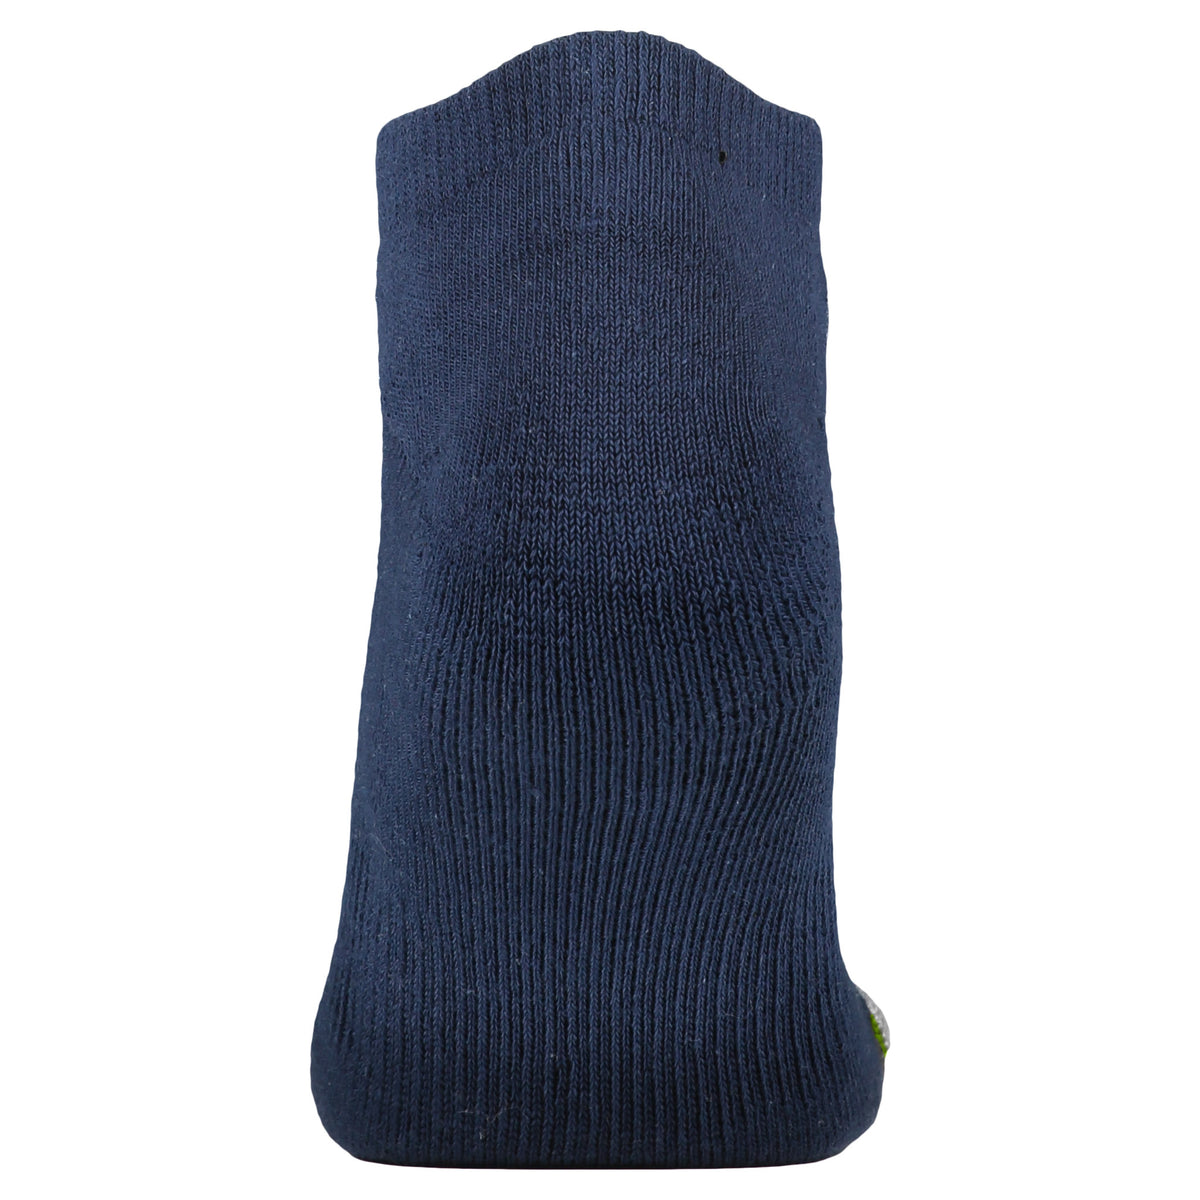 Crossfly men&#39;s Original Low Socks in navy from the Everyday series, featuring Flat Toe Seams and 360 Hold.